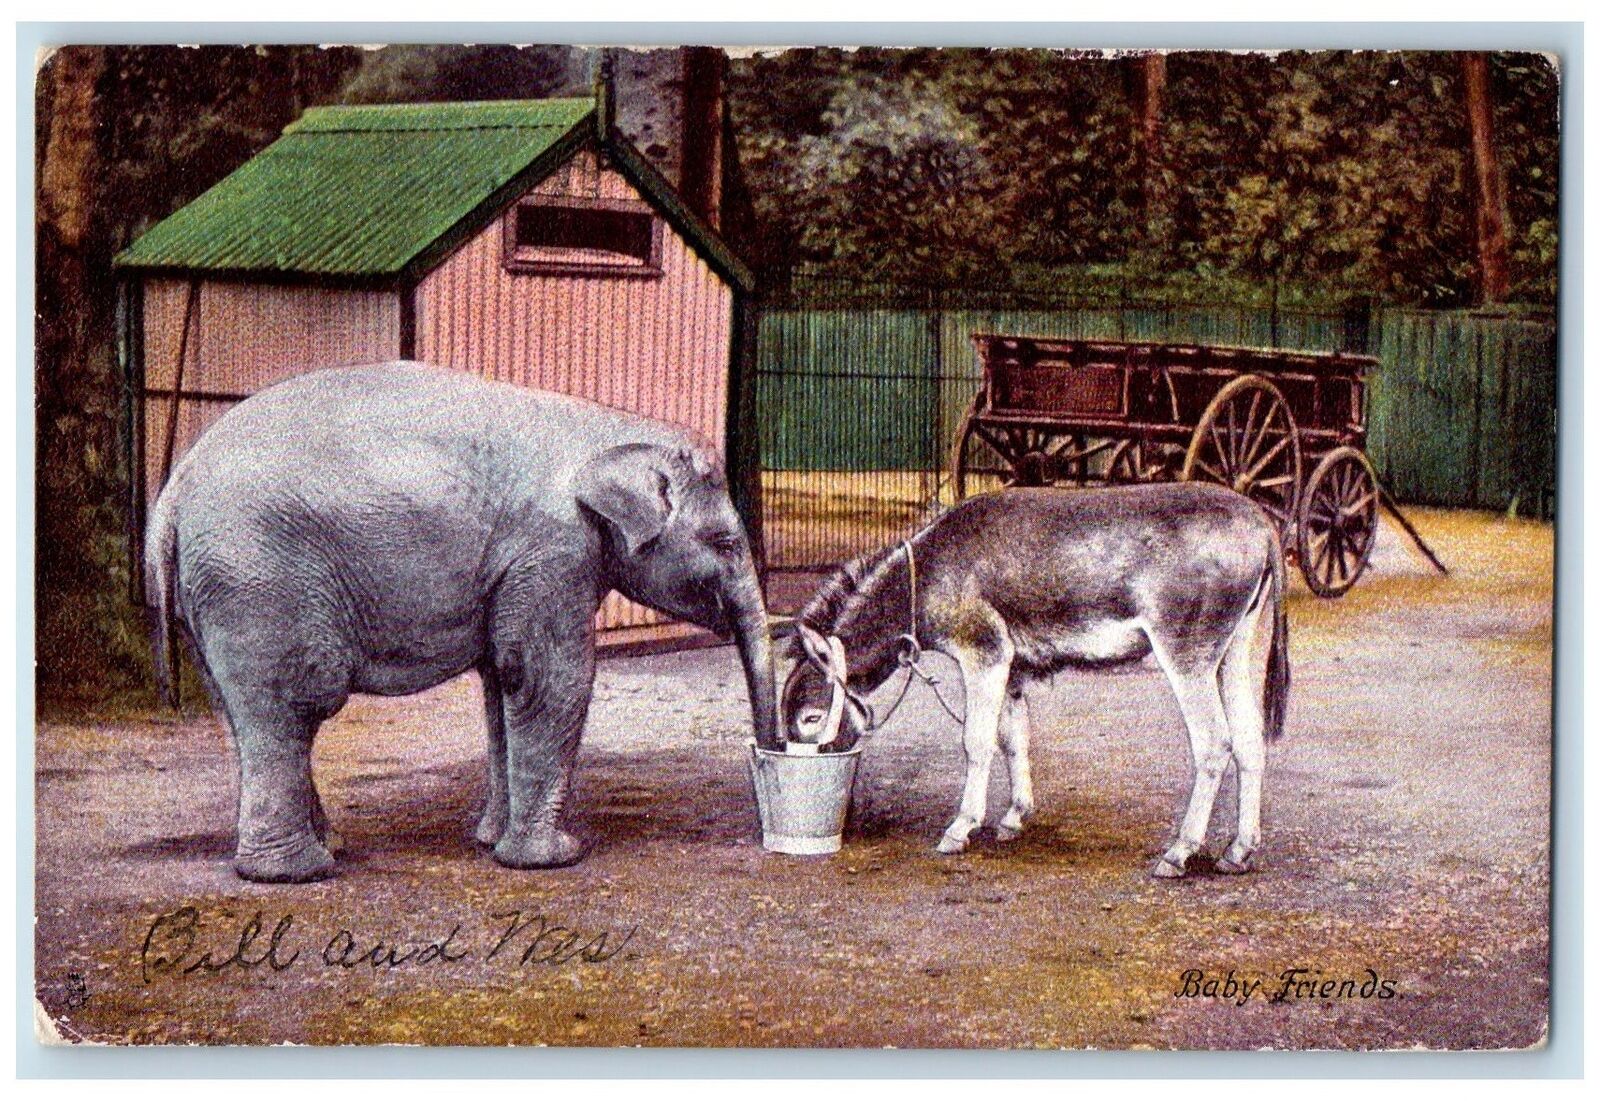 1906 Baby Friends Elephant And Donkey View Washington DC Posted Vintage Postcard